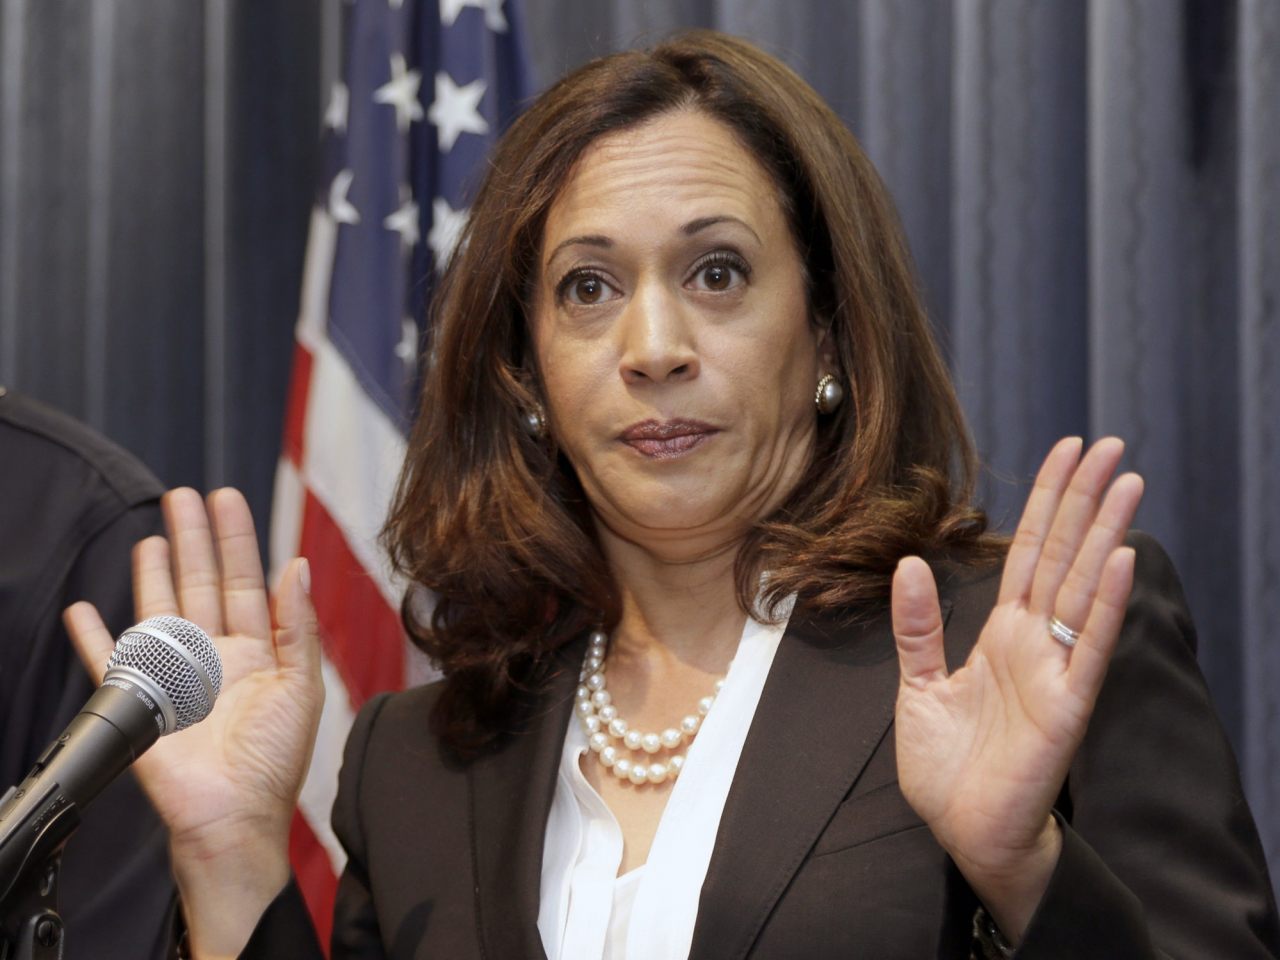 Kamala Harris says relief from Hurricane Ian should be based on skin color, ‘equity,’ meaning whites get helped LAST